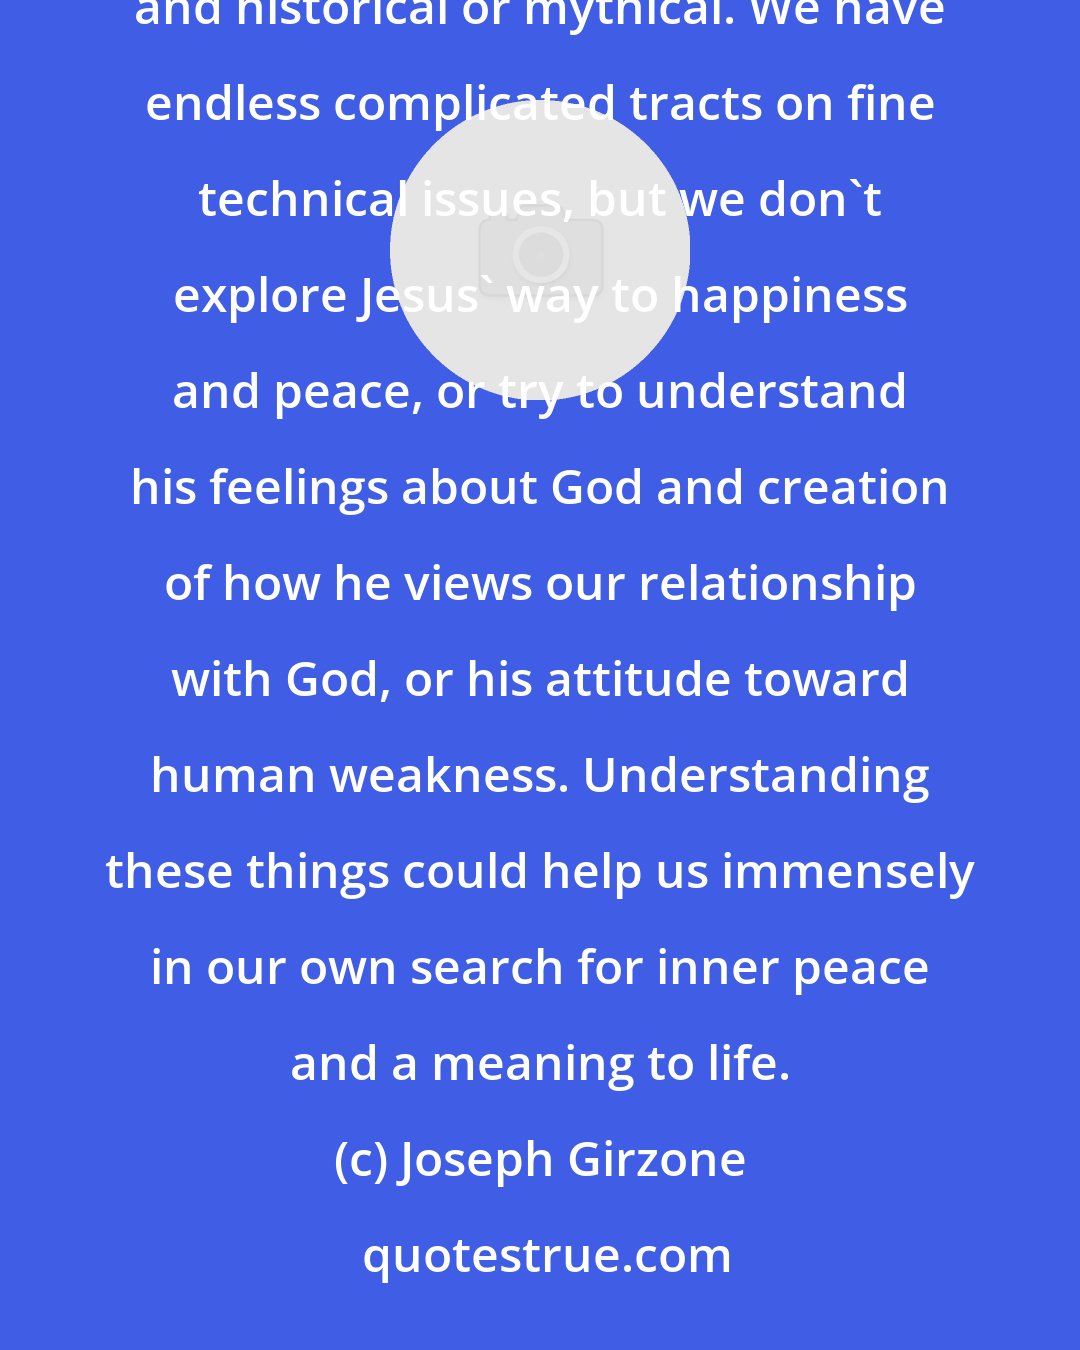 Joseph Girzone: We have endless books about whether Jesus existed, or whether the Jesus we have learned about is really accurate and historical or mythical. We have endless complicated tracts on fine technical issues, but we don't explore Jesus' way to happiness and peace, or try to understand his feelings about God and creation of how he views our relationship with God, or his attitude toward human weakness. Understanding these things could help us immensely in our own search for inner peace and a meaning to life.